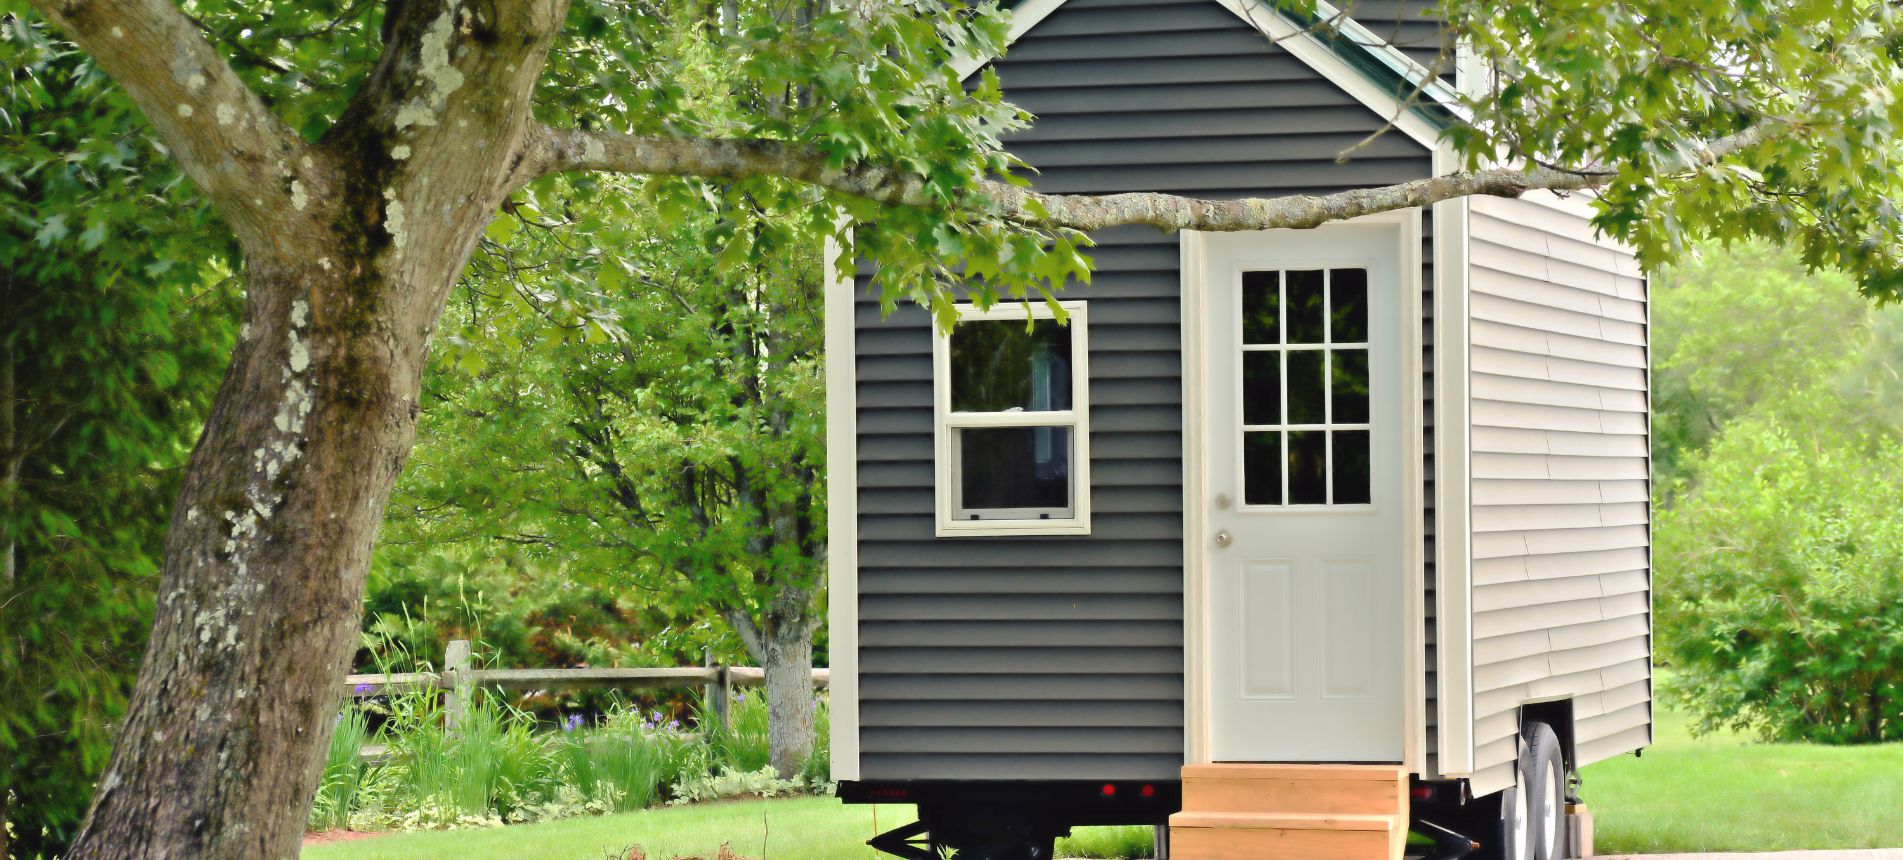 Considerations To Make for Your New Tiny Home